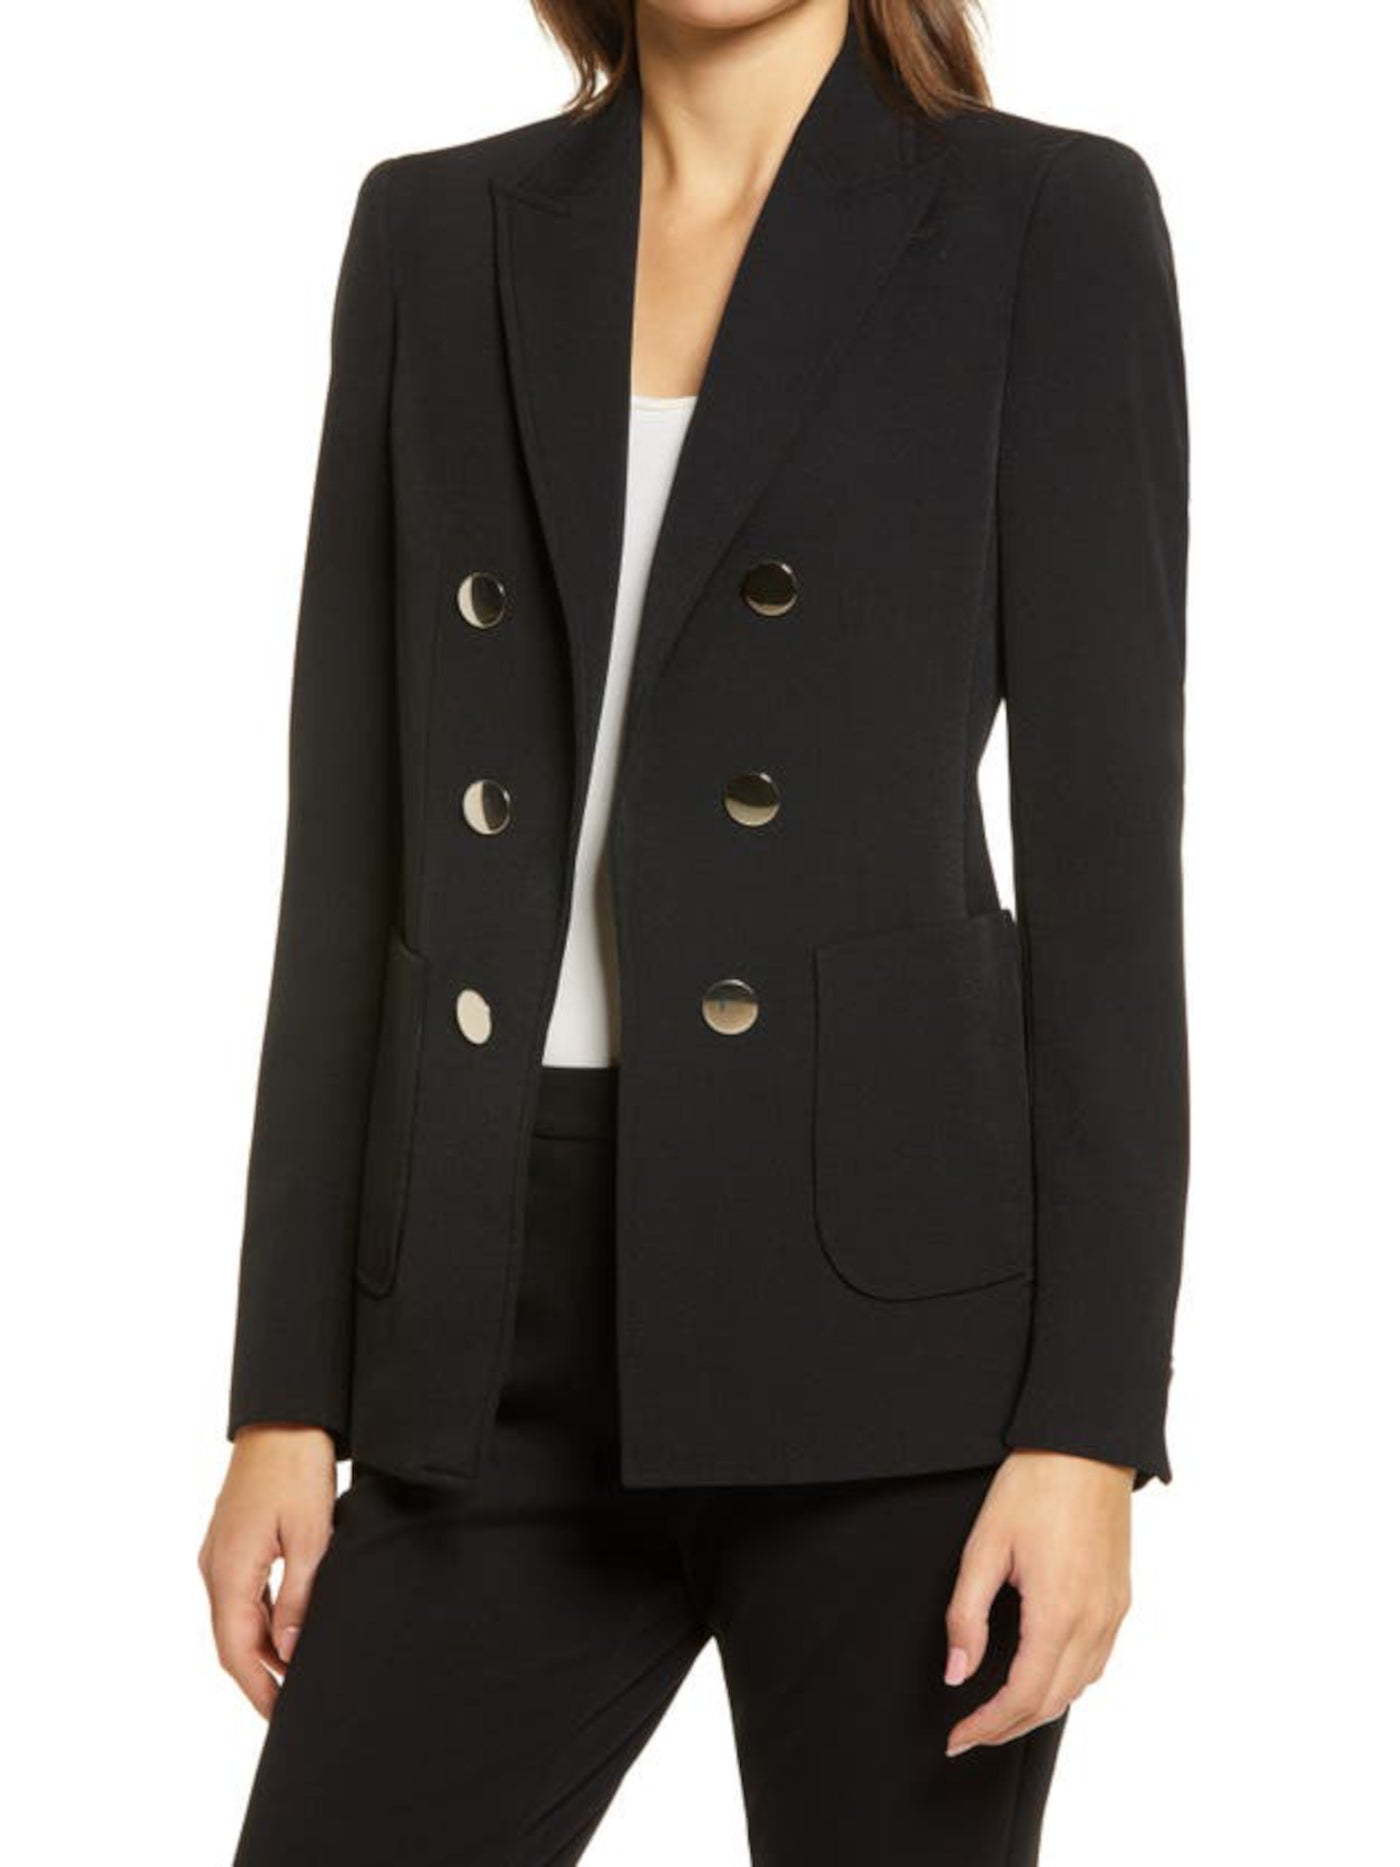 ANNE KLEIN Womens Black Open Front Pocketed Faux Double Breasted Wear To Work Jacket 0